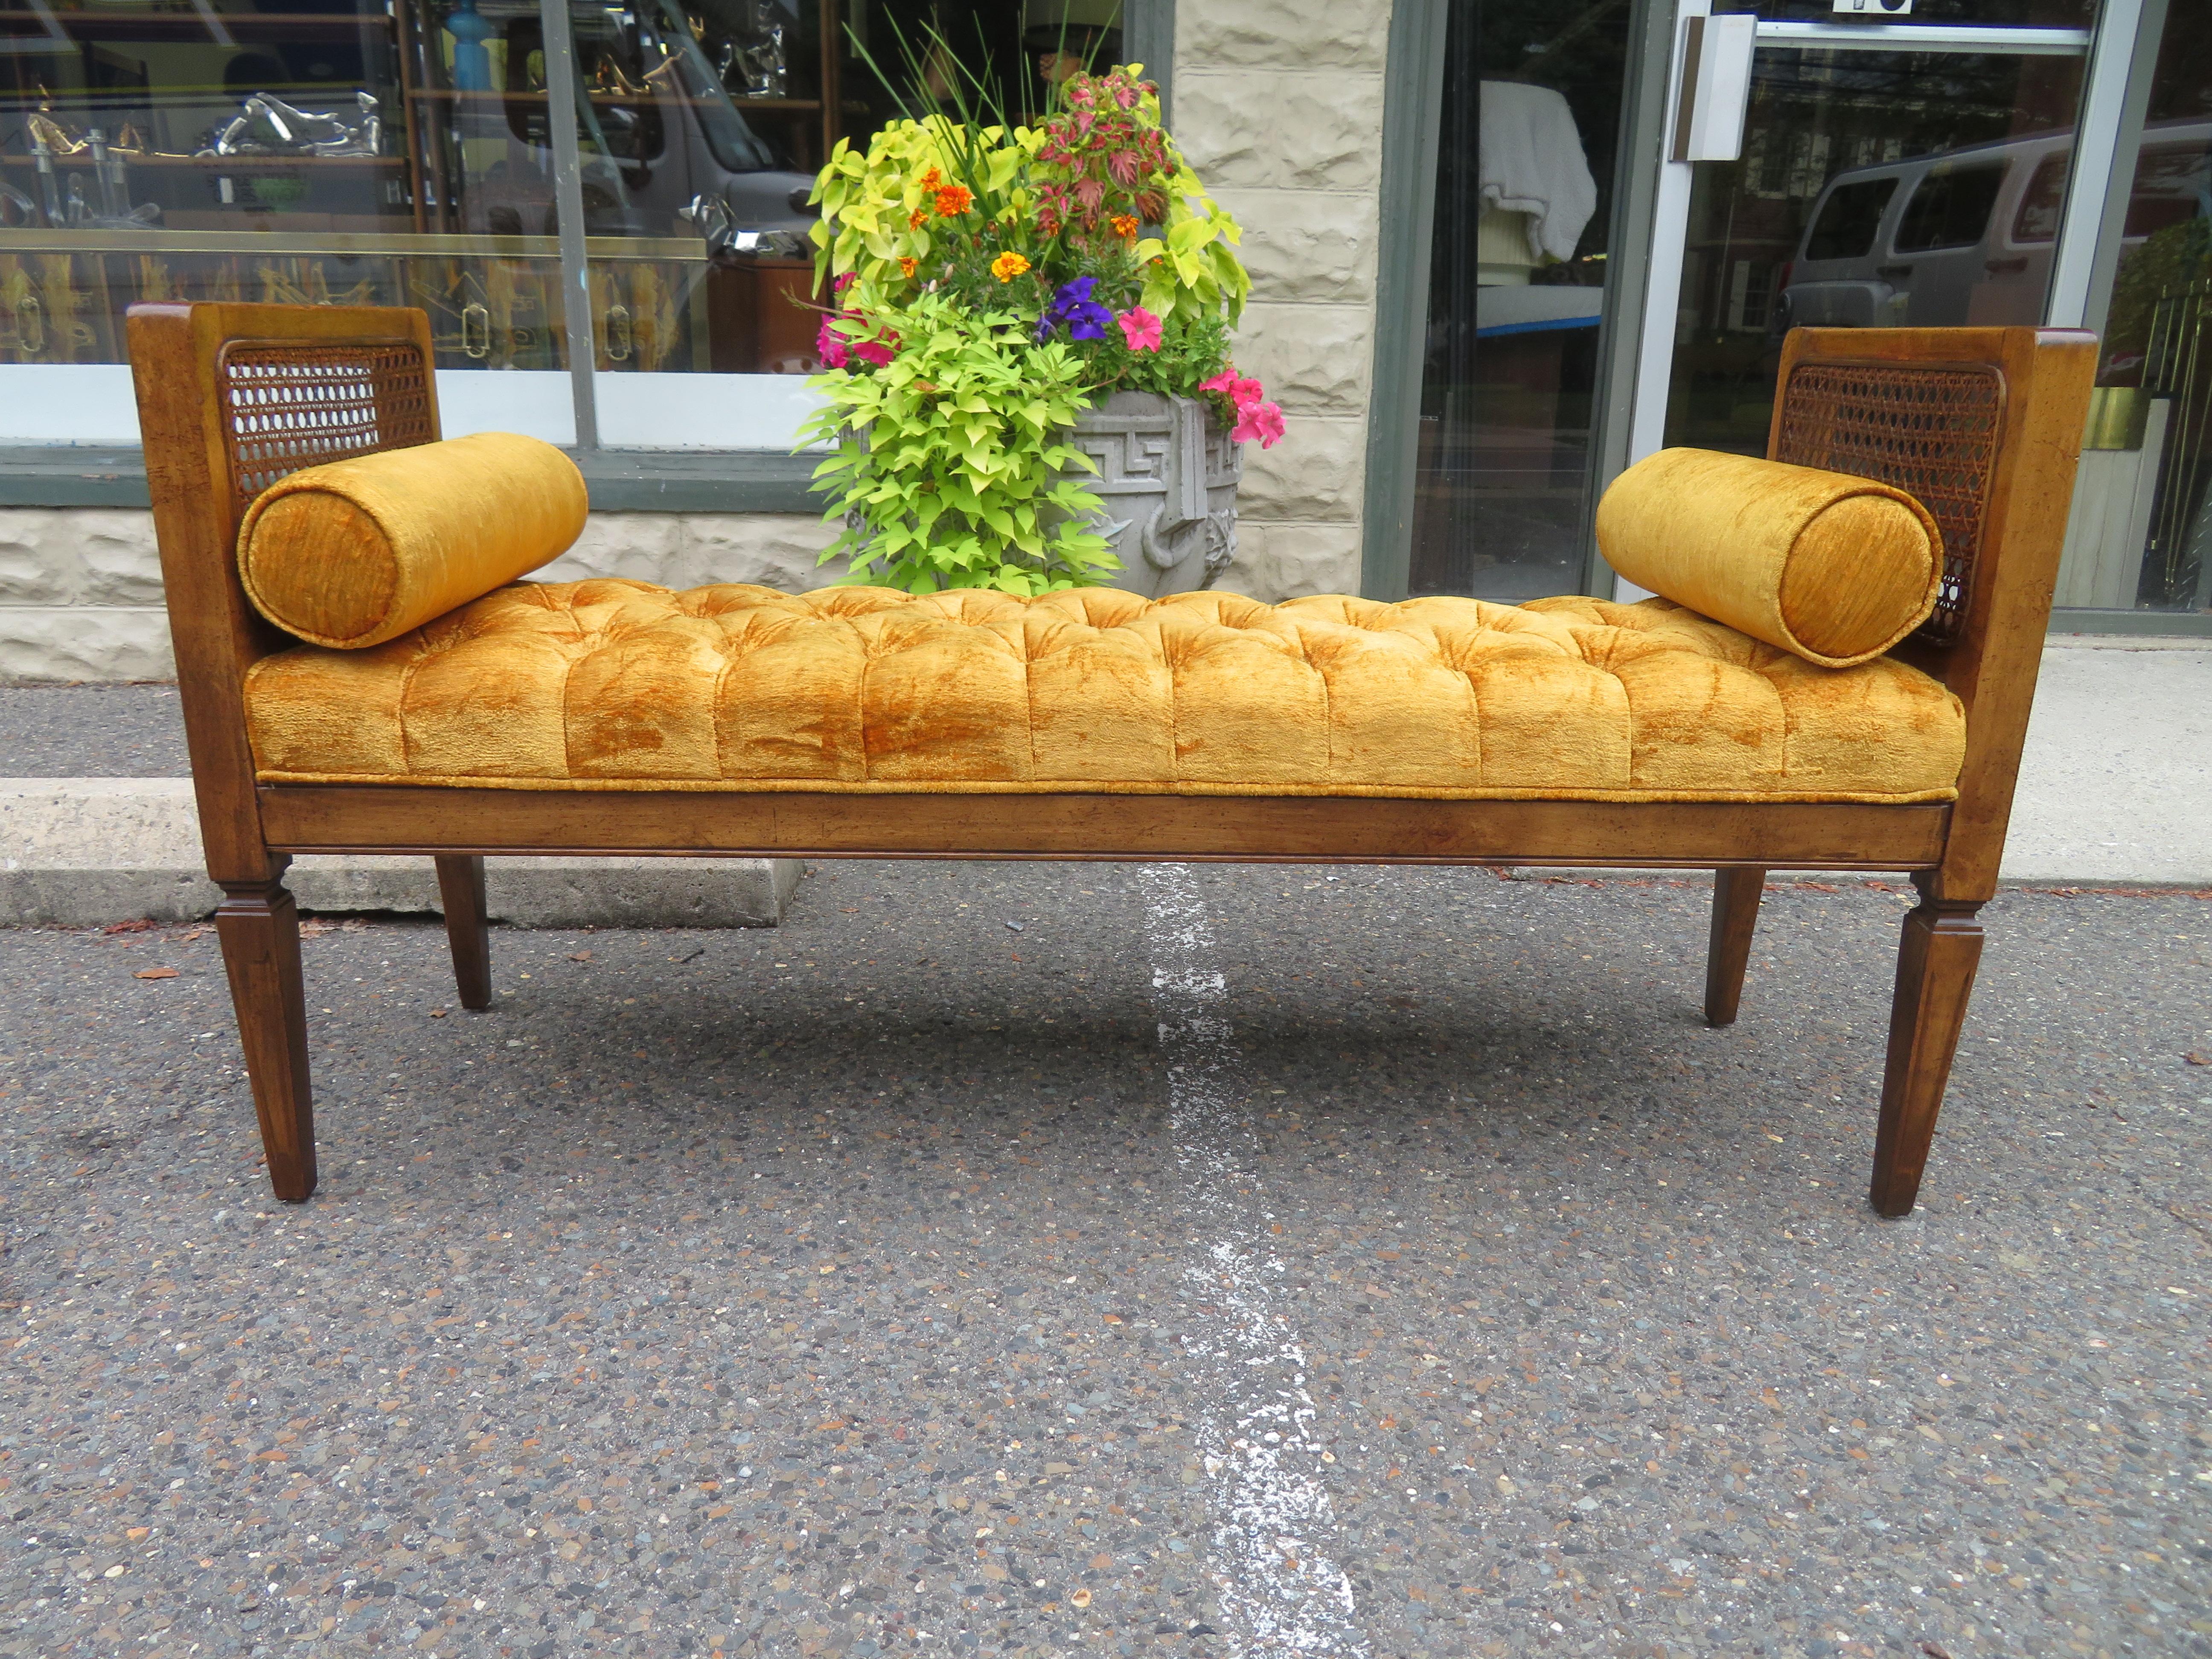 Lovely caned walnut bench with original tufted gold velvet upholstery. We love the original cylinder pillows that flank each end along with the lightly distressed original finish.